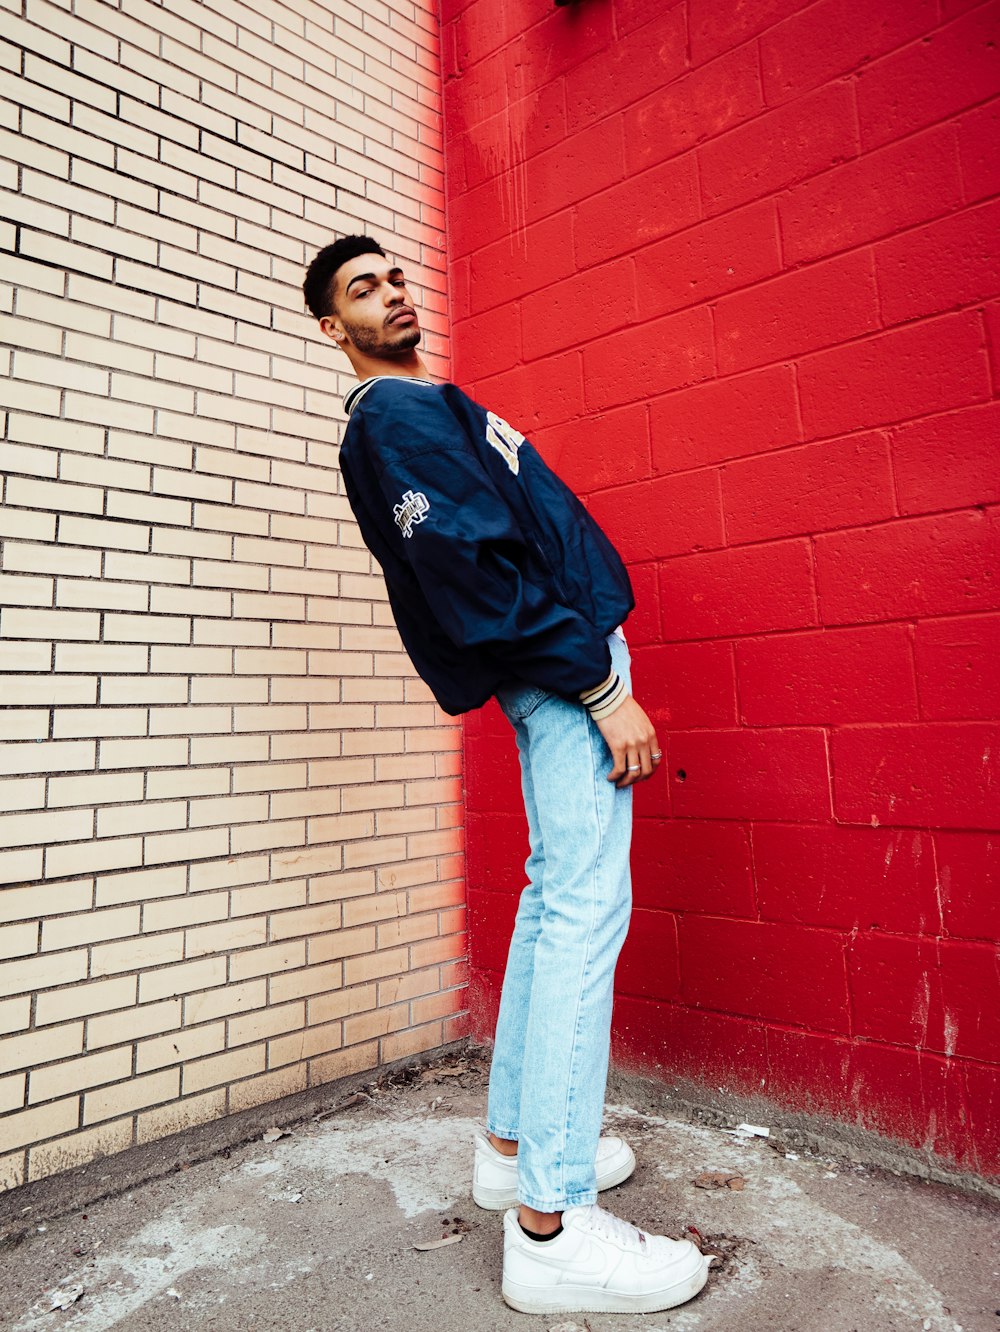 Man in blue and black adidas jacket standing beside red brick wall photo –  Free Toronto Image on Unsplash